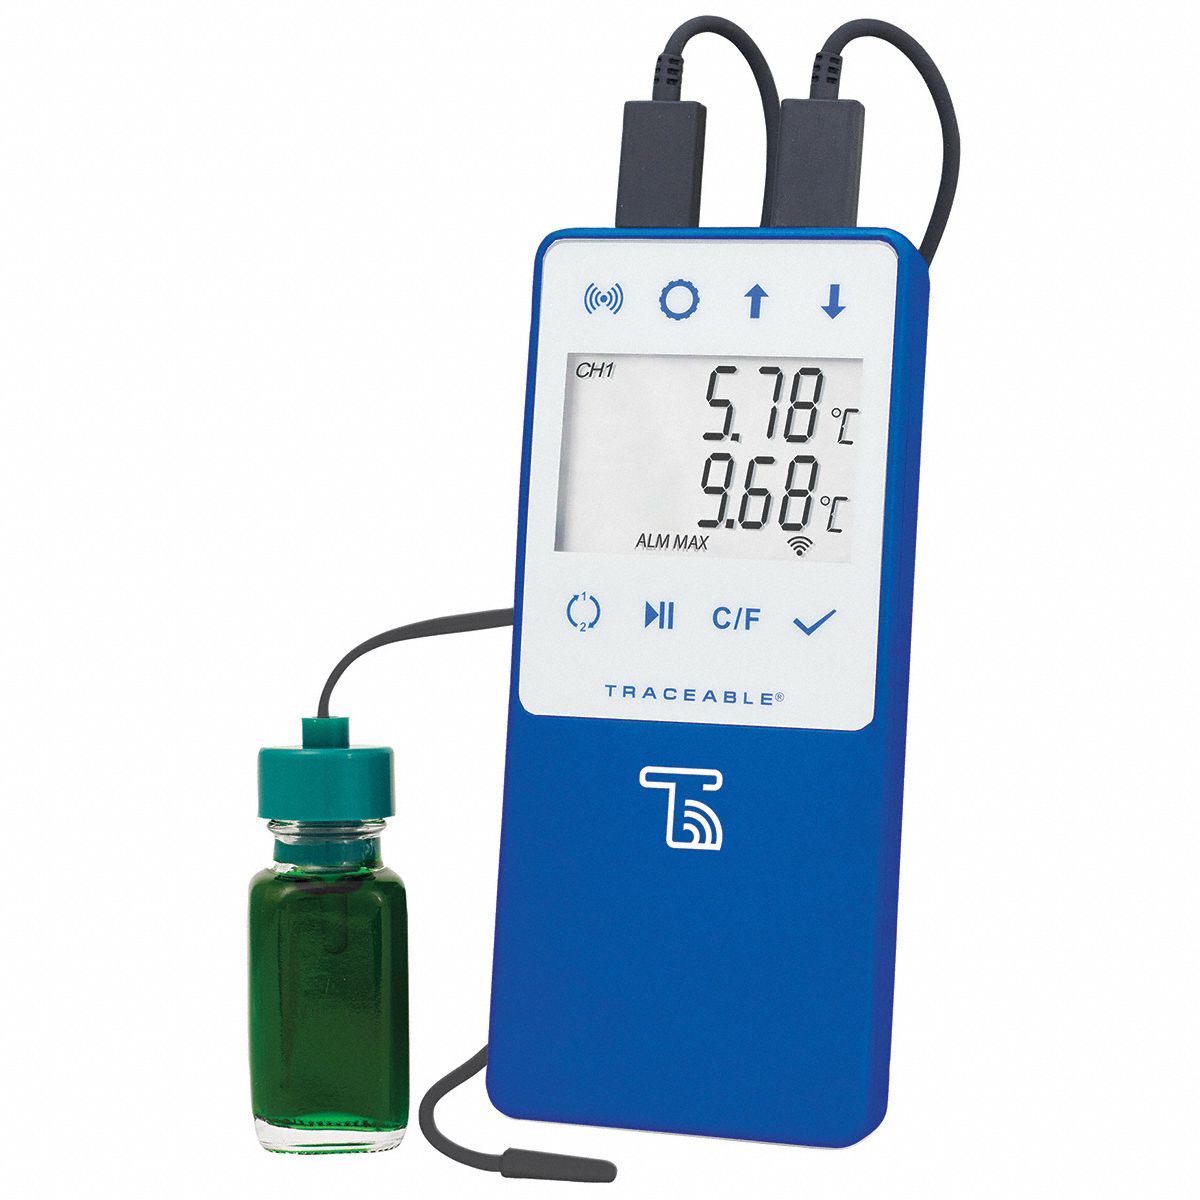 Traceable Data Logging Thermometer Wifi 802 11 B G N 58 To 140 F Temp Range F 52ce42 6501 Grainger